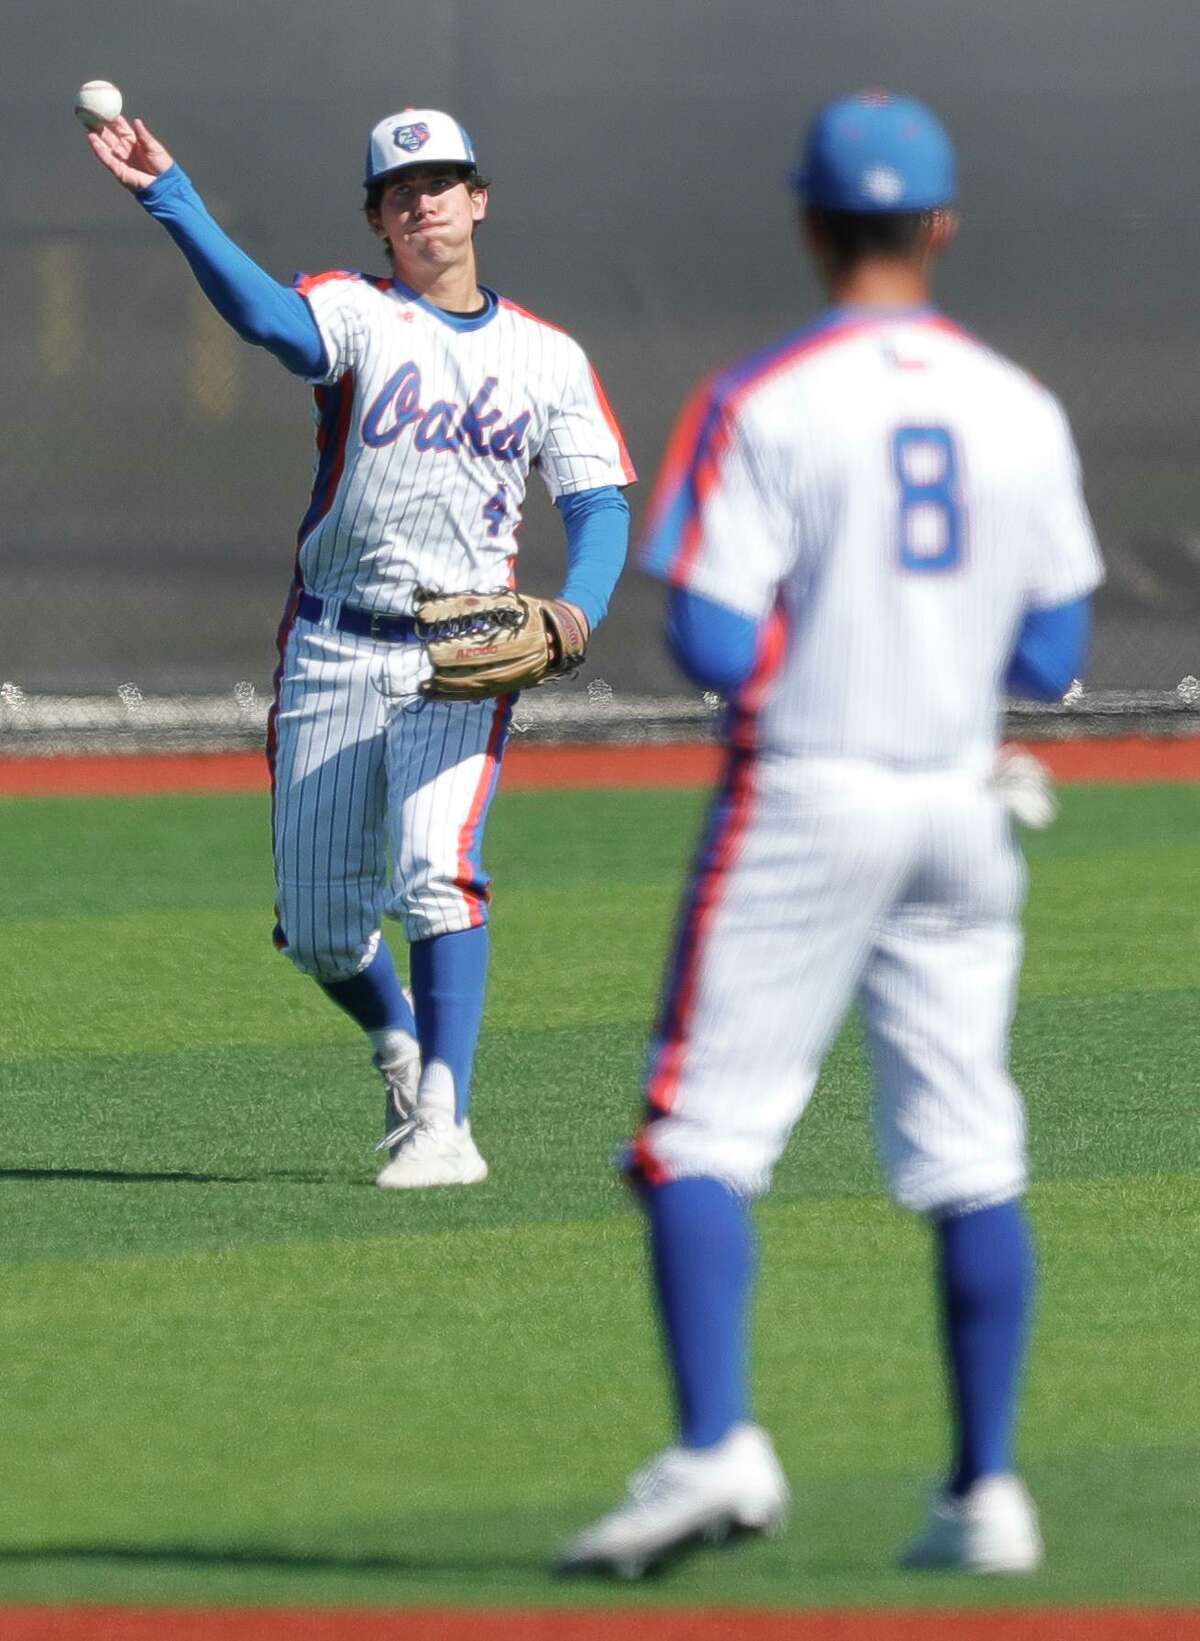 Grand Oaks center fielder Landon Meade (4) fields a single in the first inning of a high school baseball game at Grand Oaks High School, Saturday, March 12, 2022, in Spring.